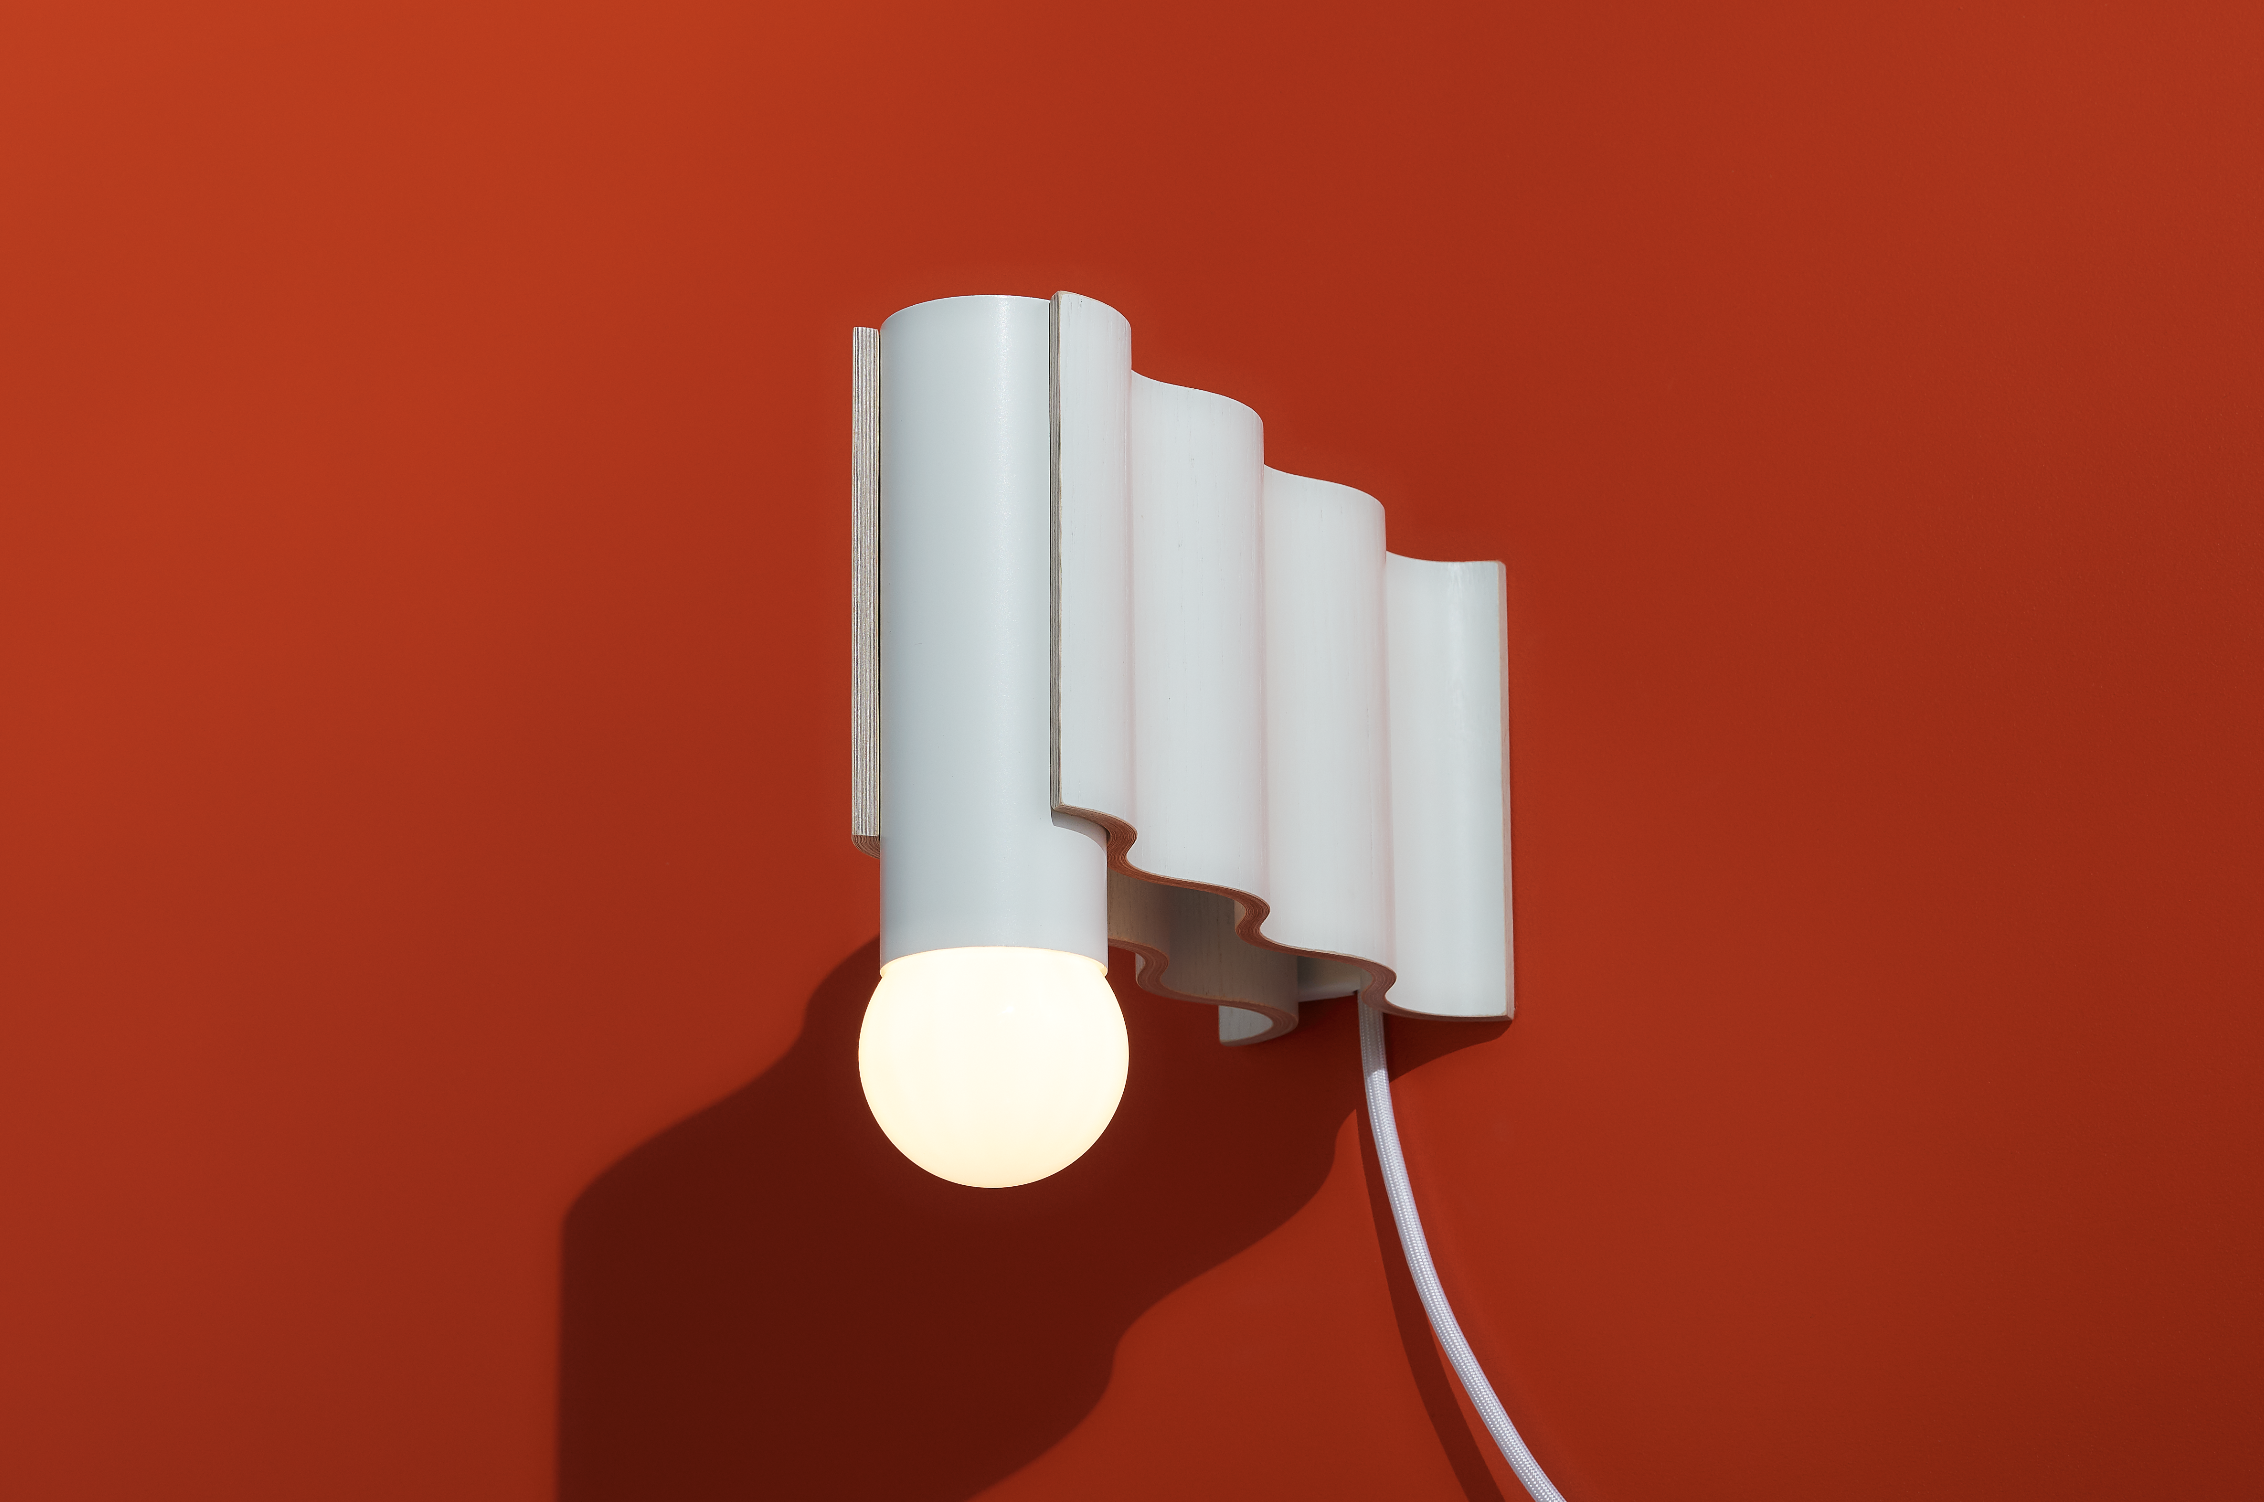 Corrugation is a collection of lights inspired by mid-century furniture making, honouring the technique of veneer forming. It consists of a scalable hanging light and wall sconces, which can serve as building blocks.